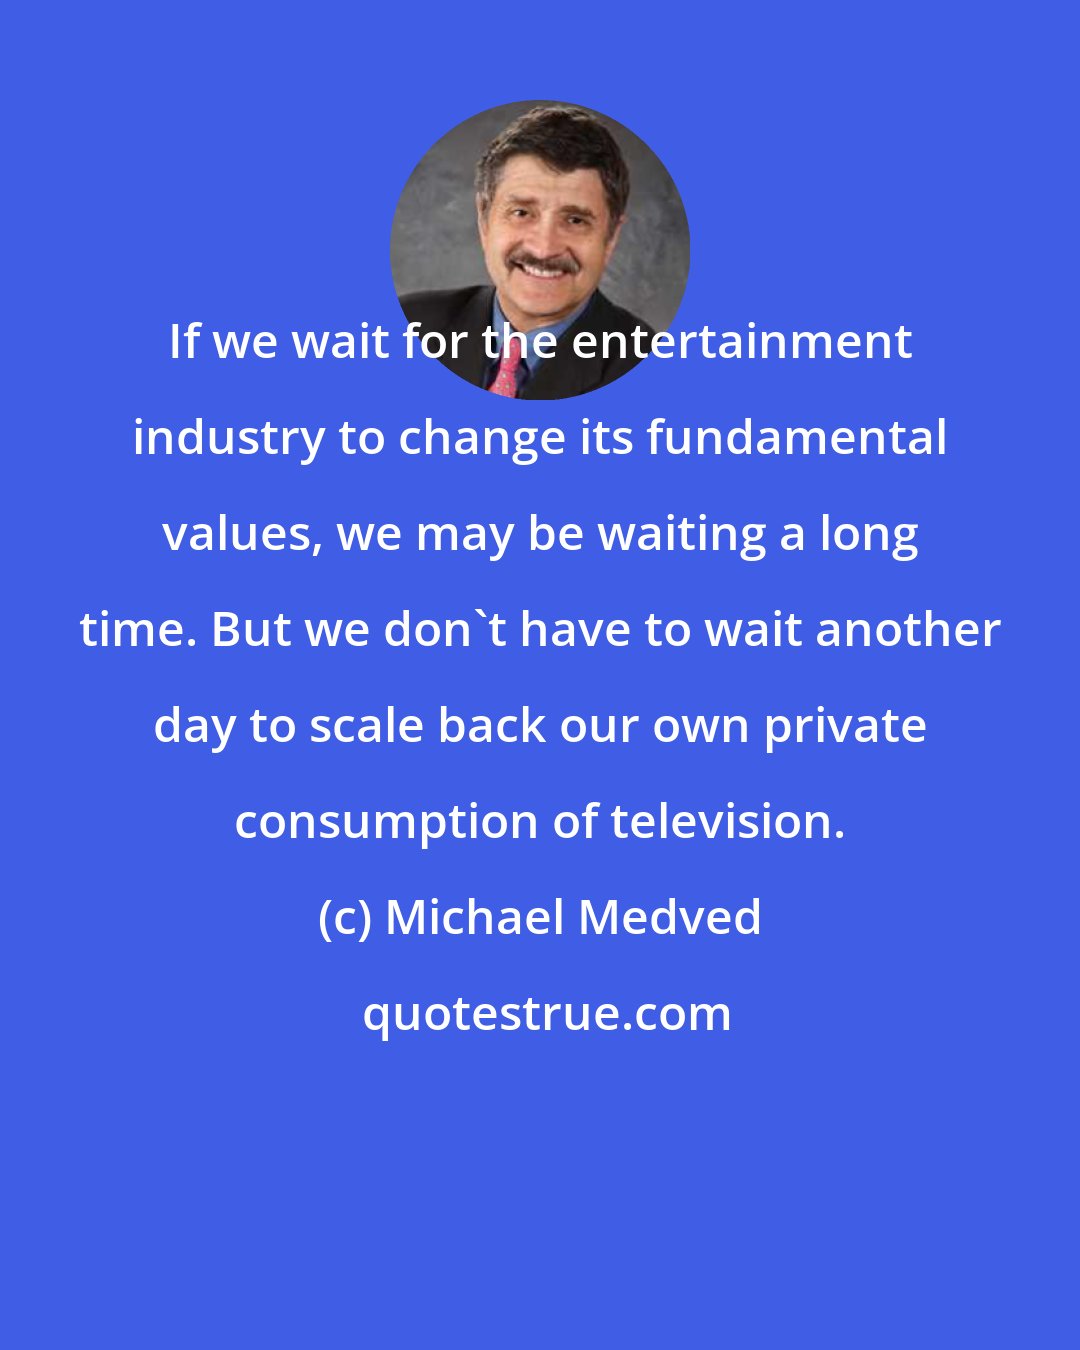 Michael Medved: If we wait for the entertainment industry to change its fundamental values, we may be waiting a long time. But we don't have to wait another day to scale back our own private consumption of television.